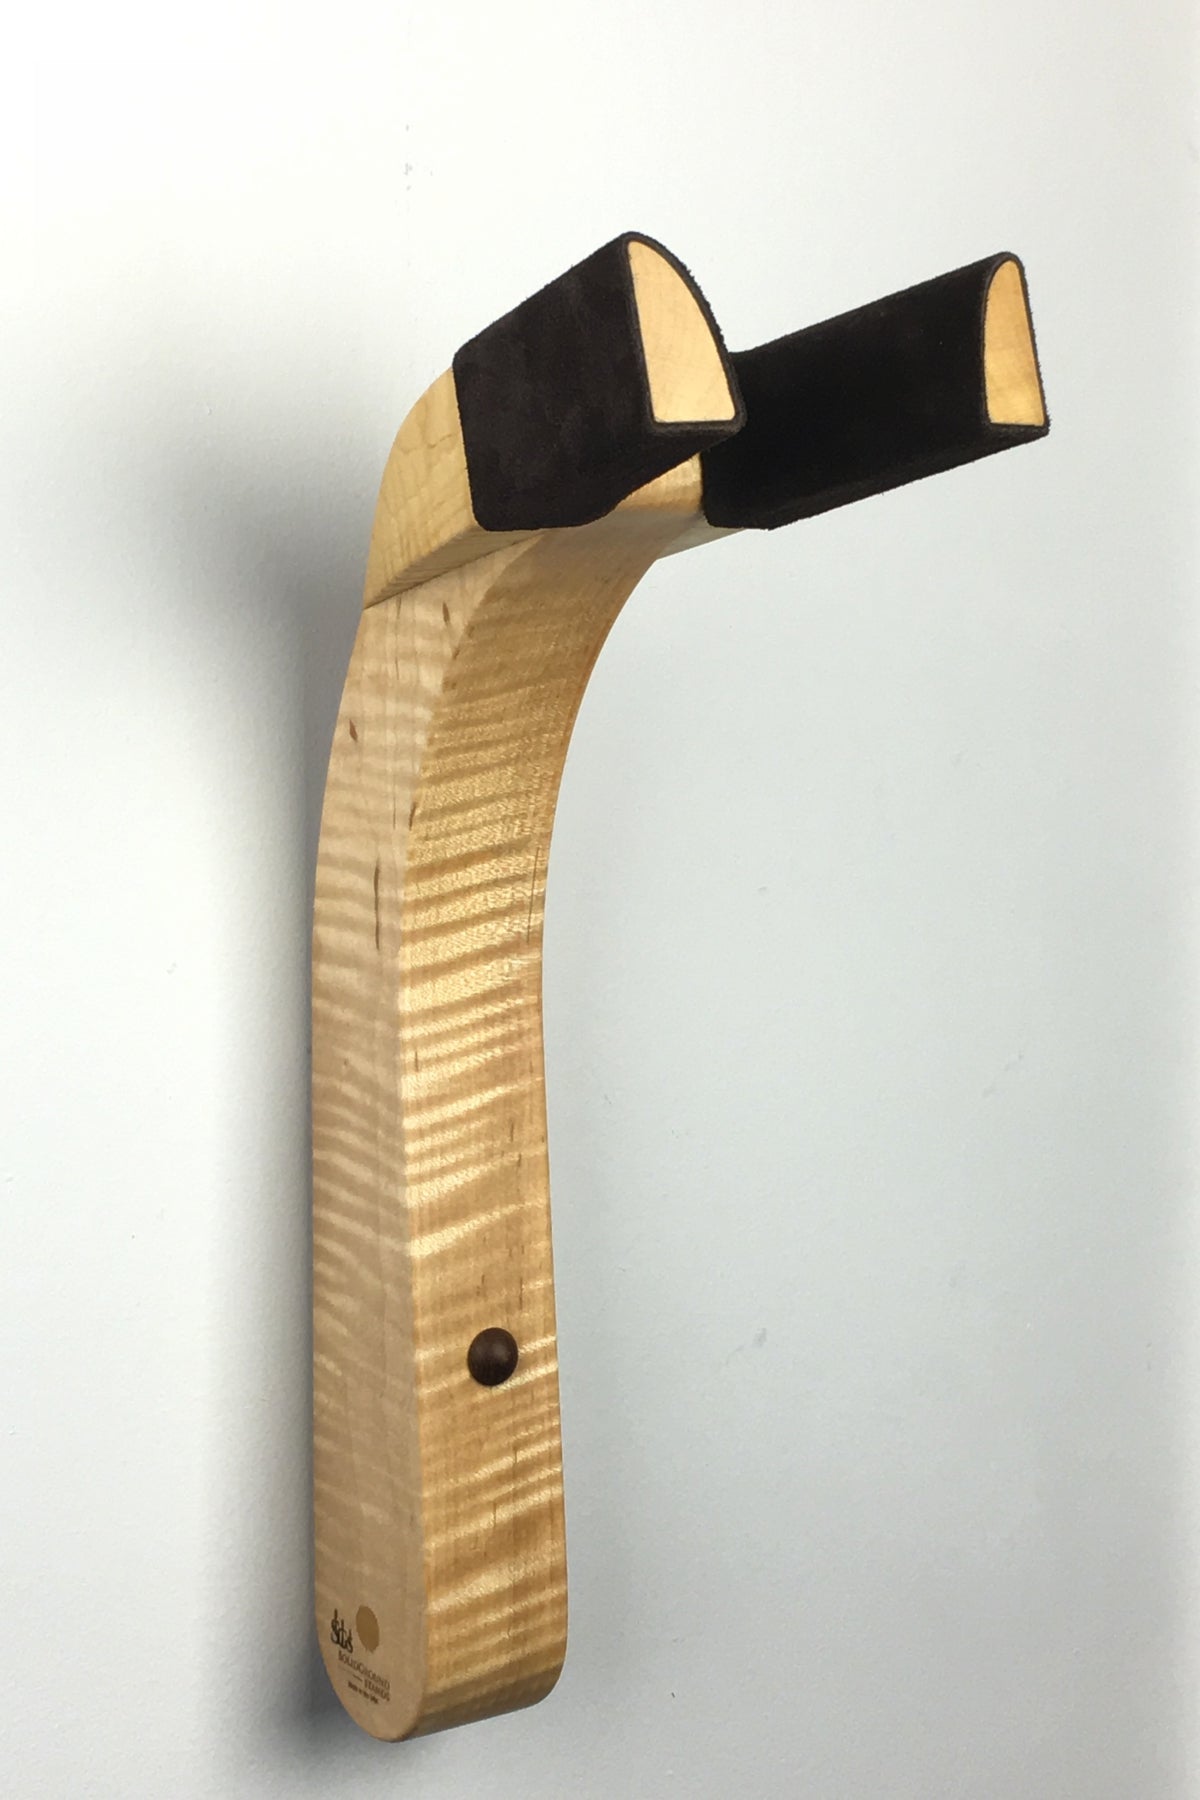 Curly maple wood guitar wall mount hanger